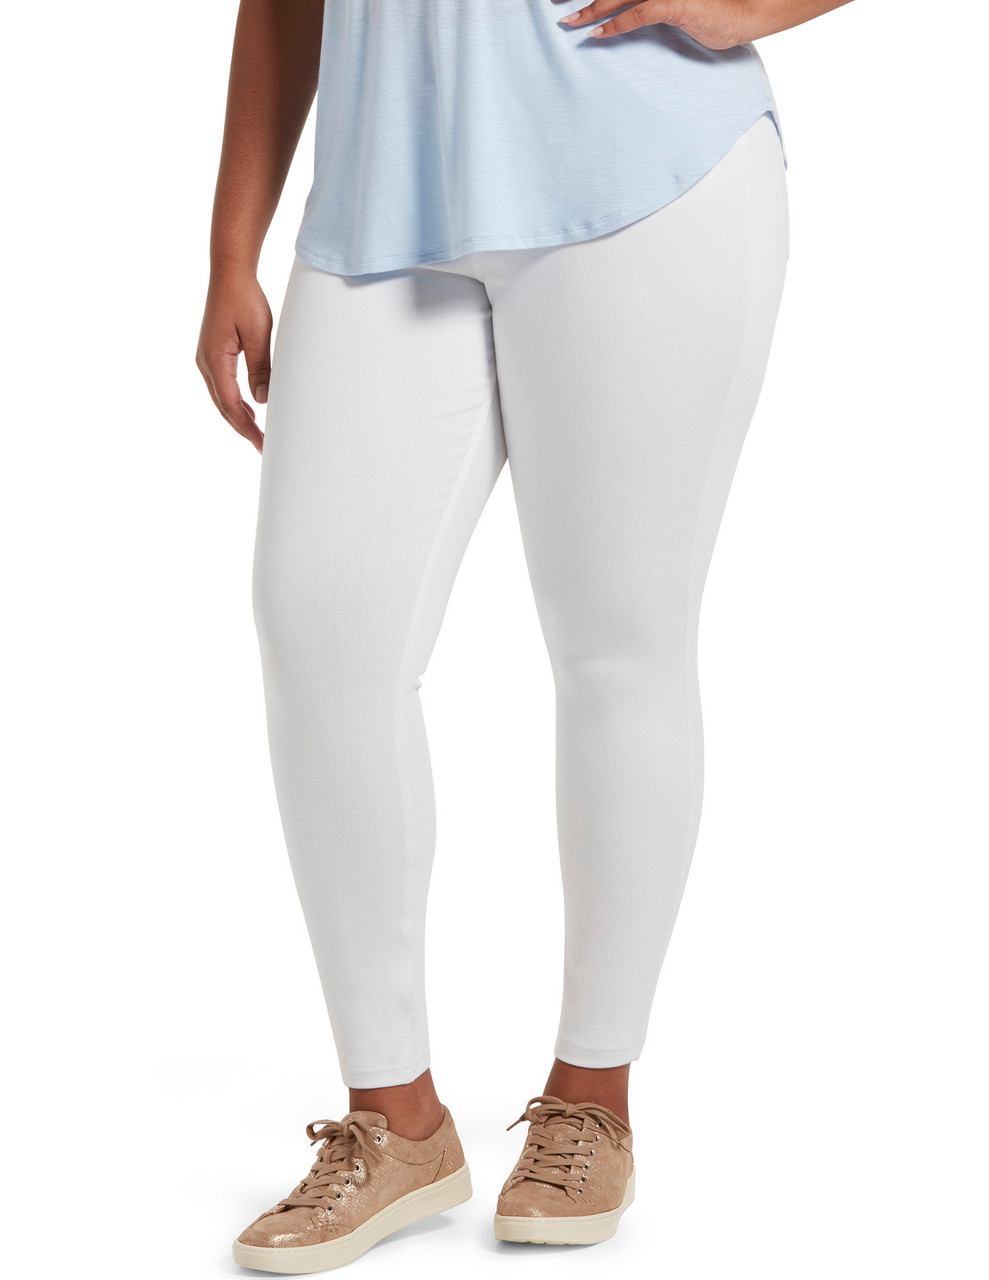 QISIWOLE Jeggings for Women High Waist, Leggings with Pockets